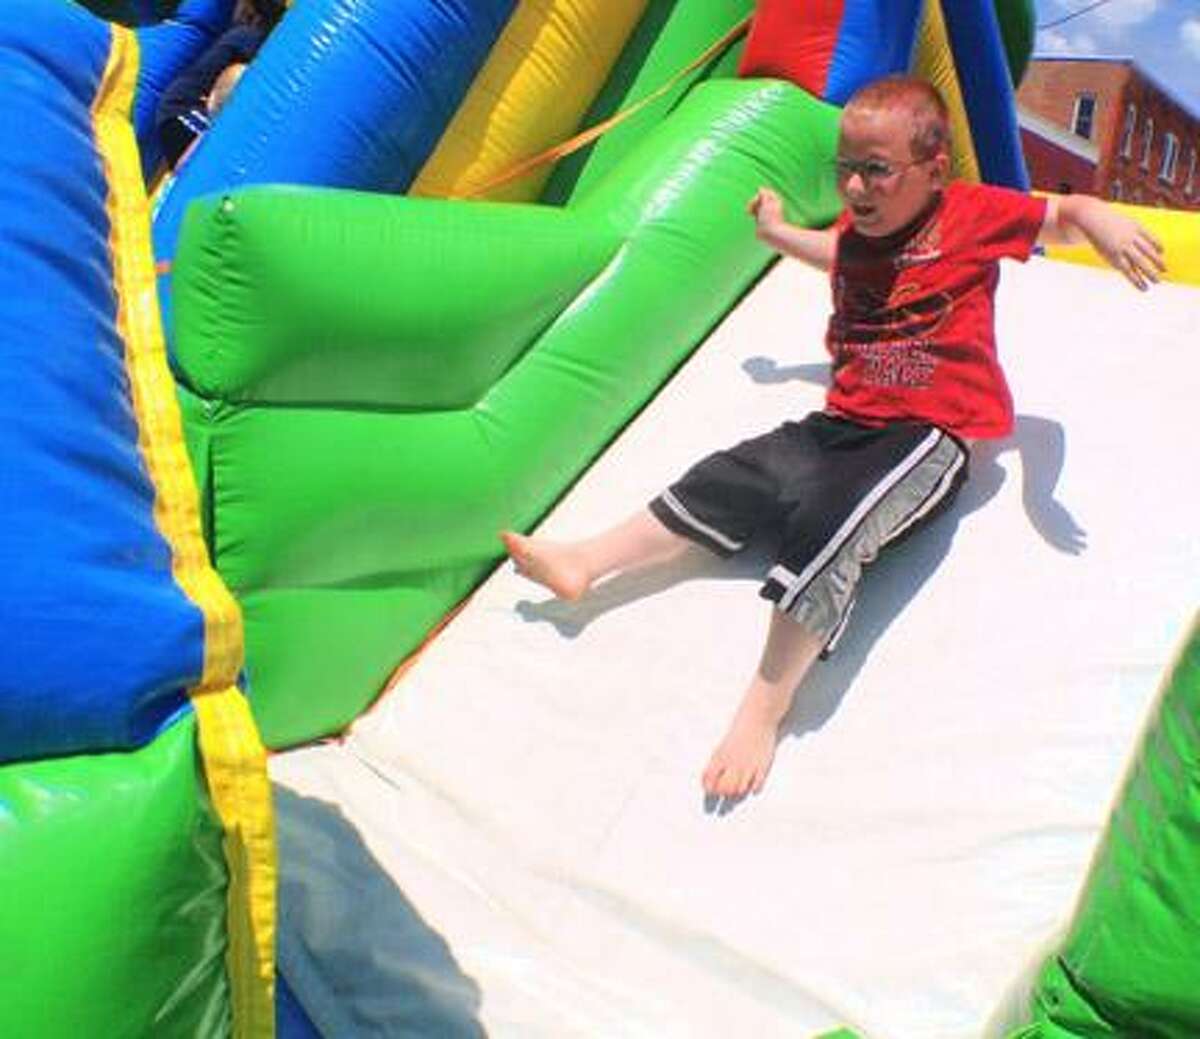 Dispatch Staff Photo by JOHN HAEGER twitter.com/oneidaphoto Dokata Lighthaul 6, of Oneida slides down one of the bounce houses during the annual Rock the Block held by Church on the Rock on Saturday, June 16 , 2012 in Oneida.